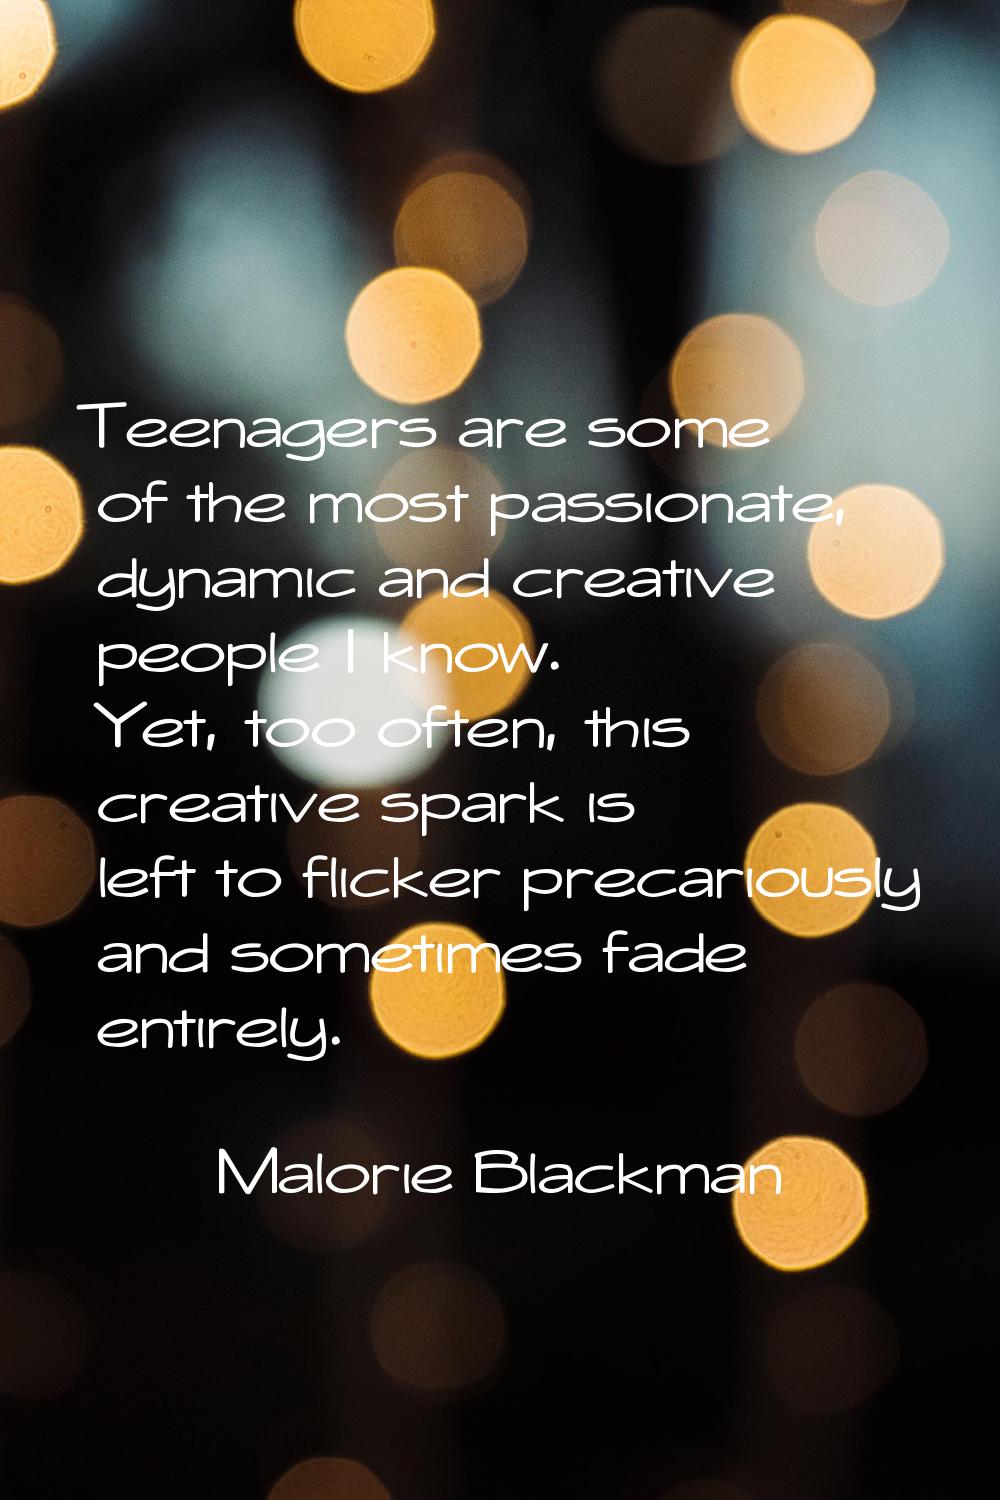 Teenagers are some of the most passionate, dynamic and creative people I know. Yet, too often, this